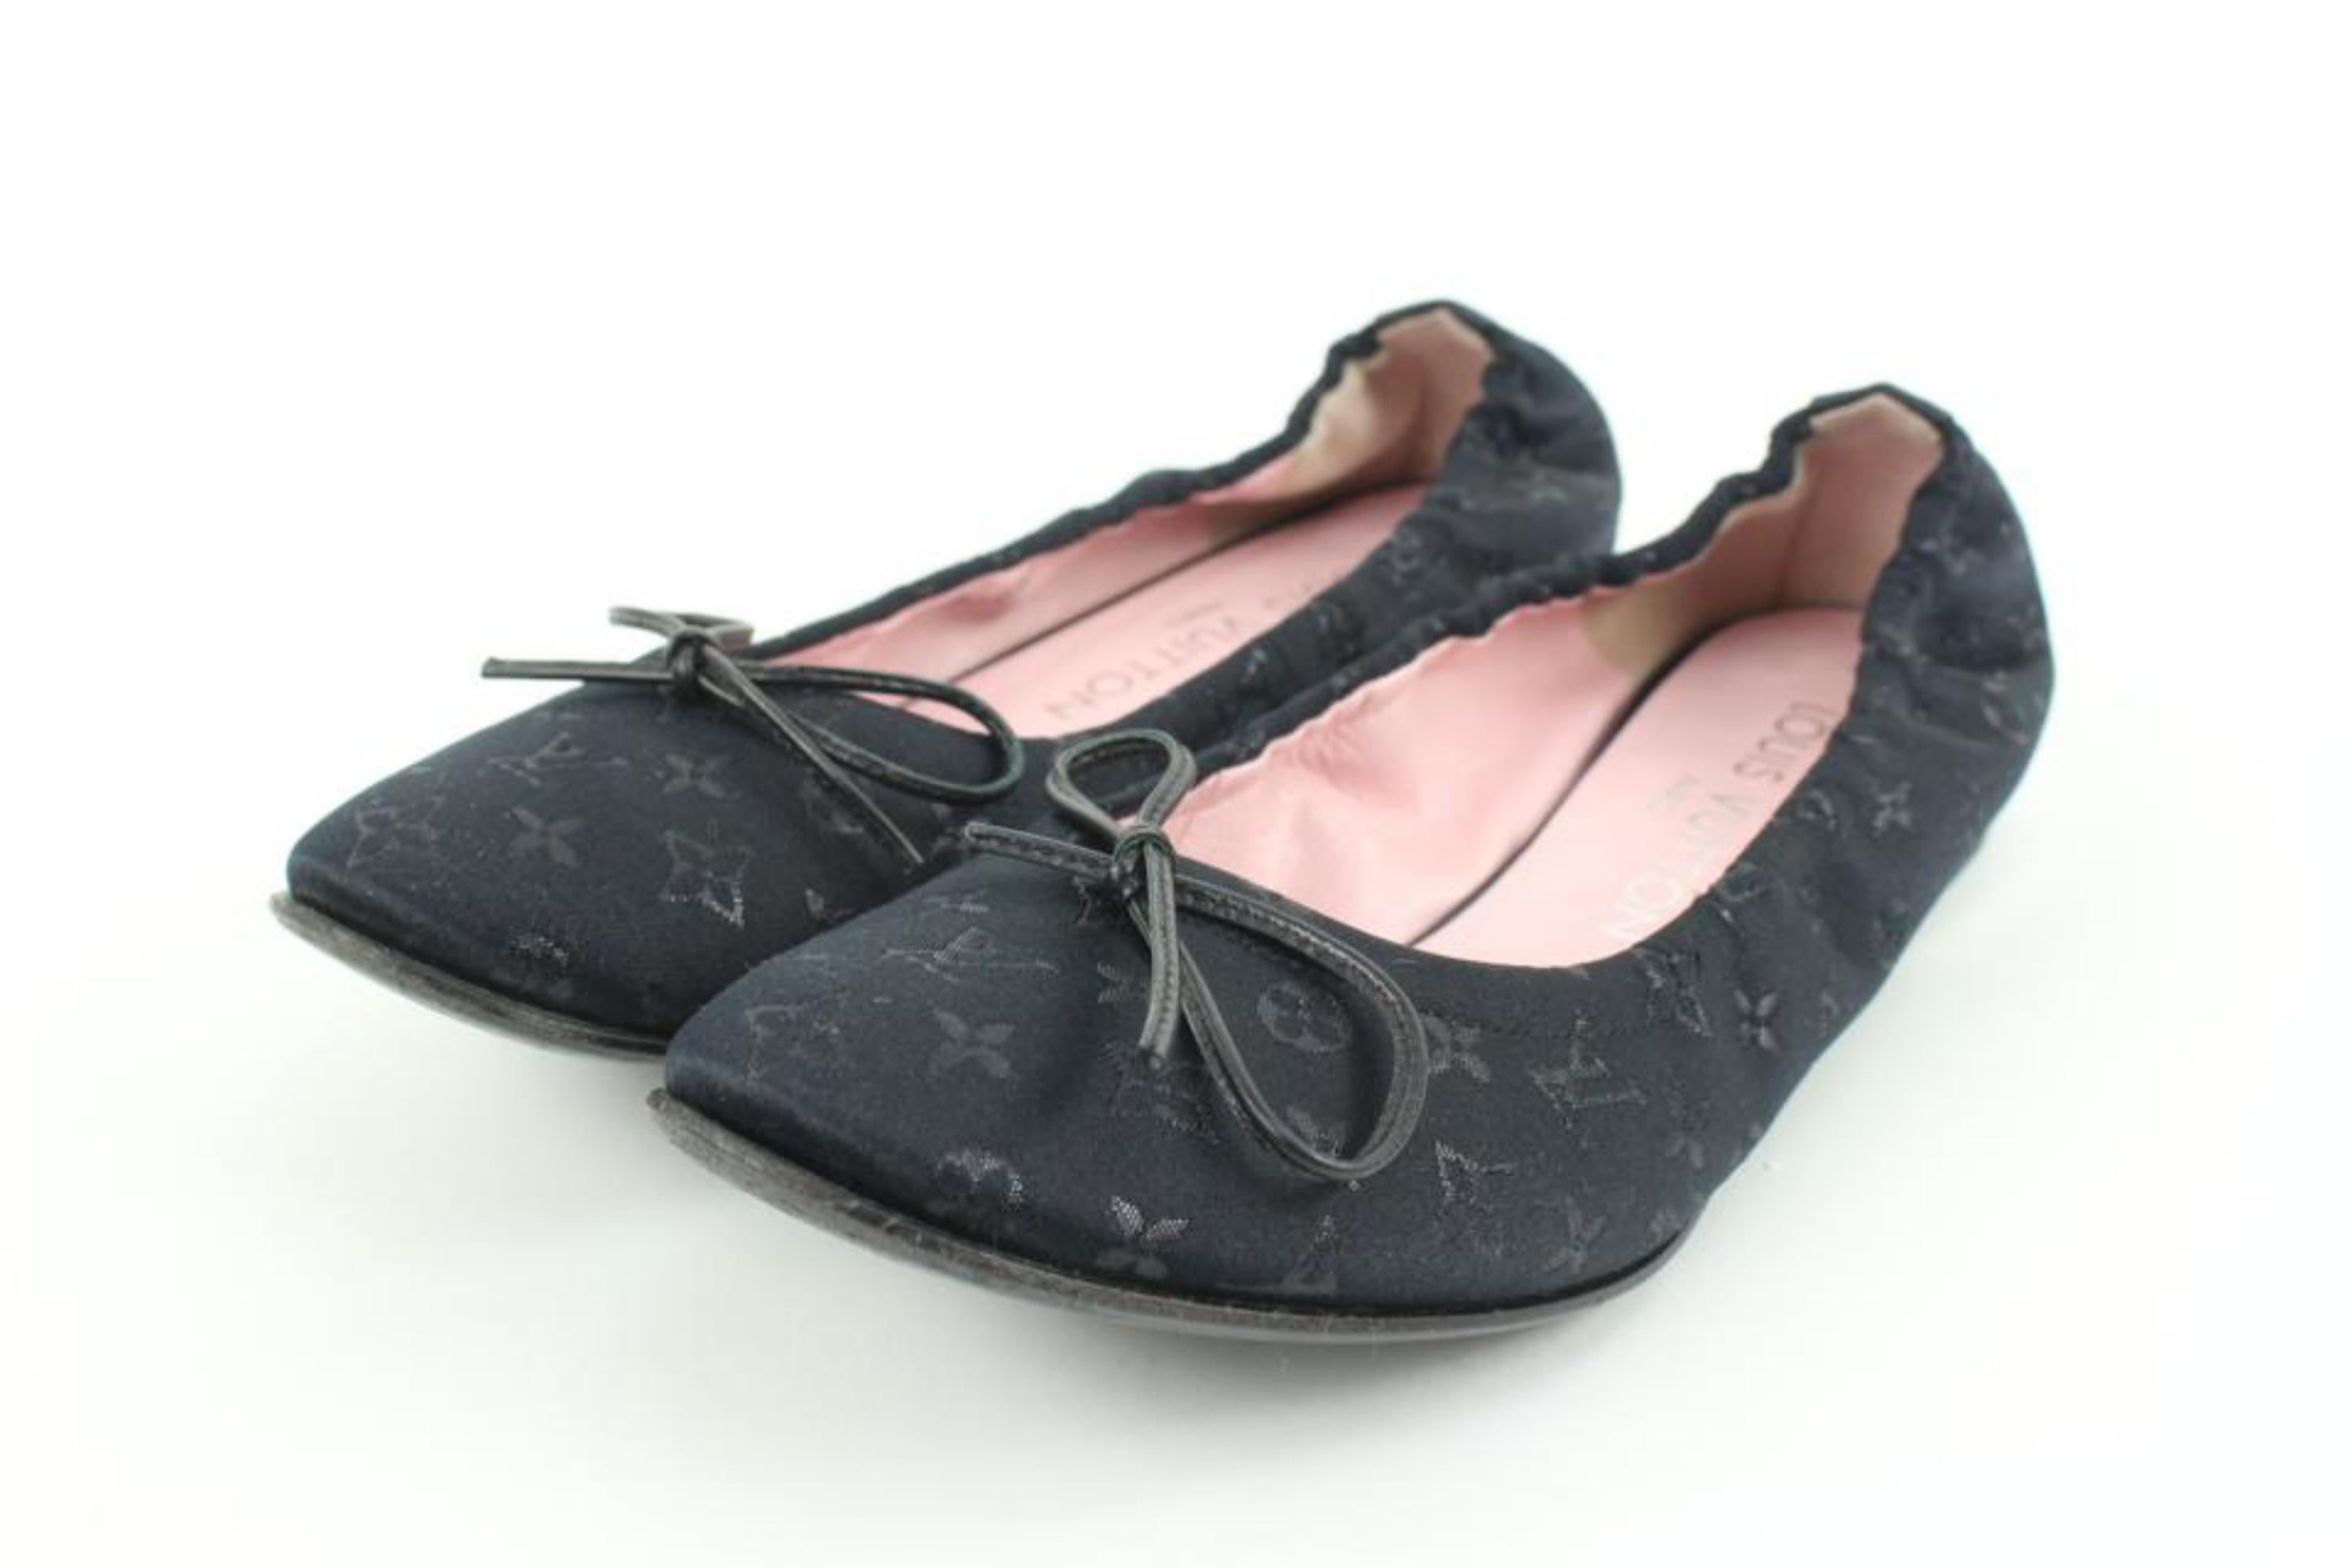 Louis Vuitton Size 34.5 Black Monogram Satin Ballerina Flats 62lv32s
Date Code/Serial Number: AR0032
Made In: Italy
Measurements: Length:  8.5